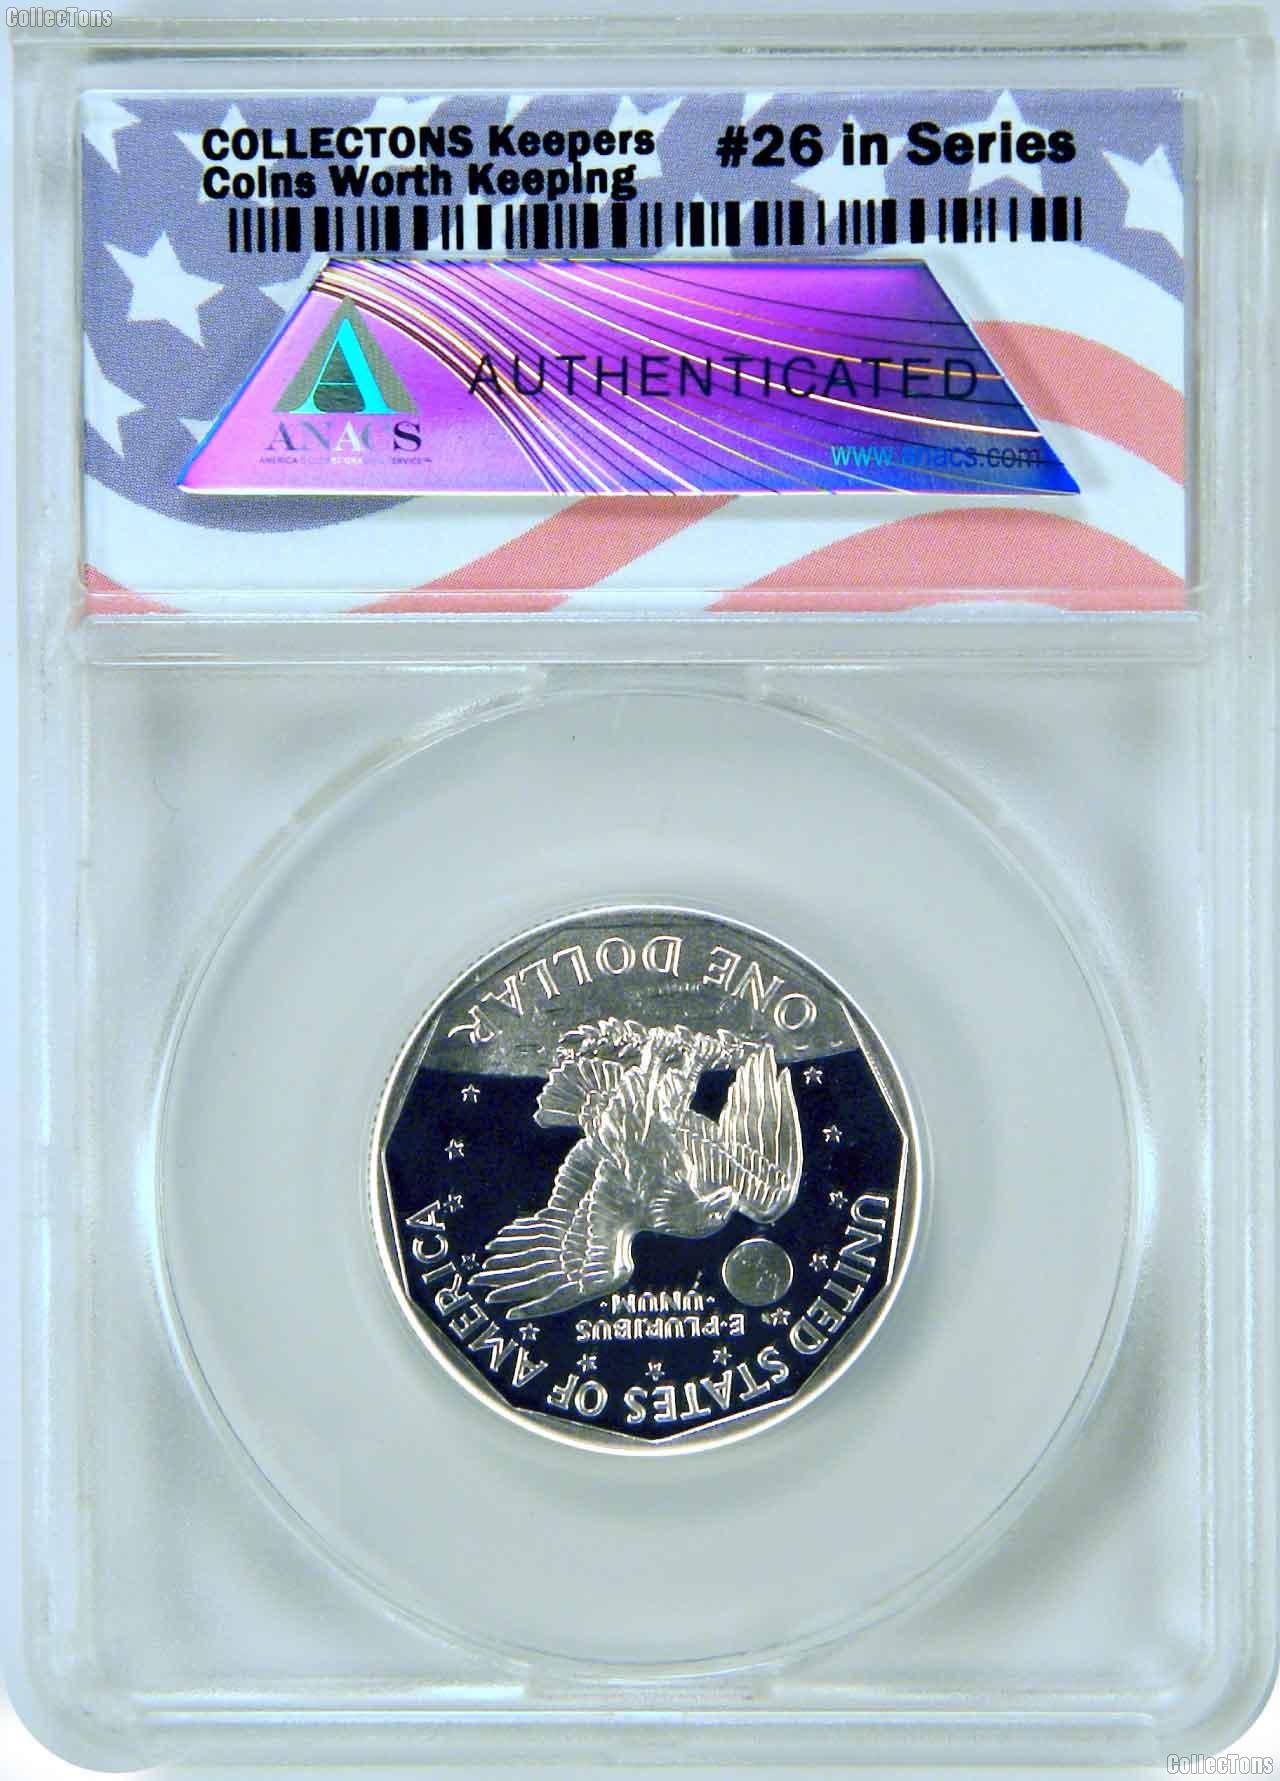 CollecTons Keepers #26: 1999-P Proof Susan B. Anthony Dollar Certified in Exclusive ANACS Holder